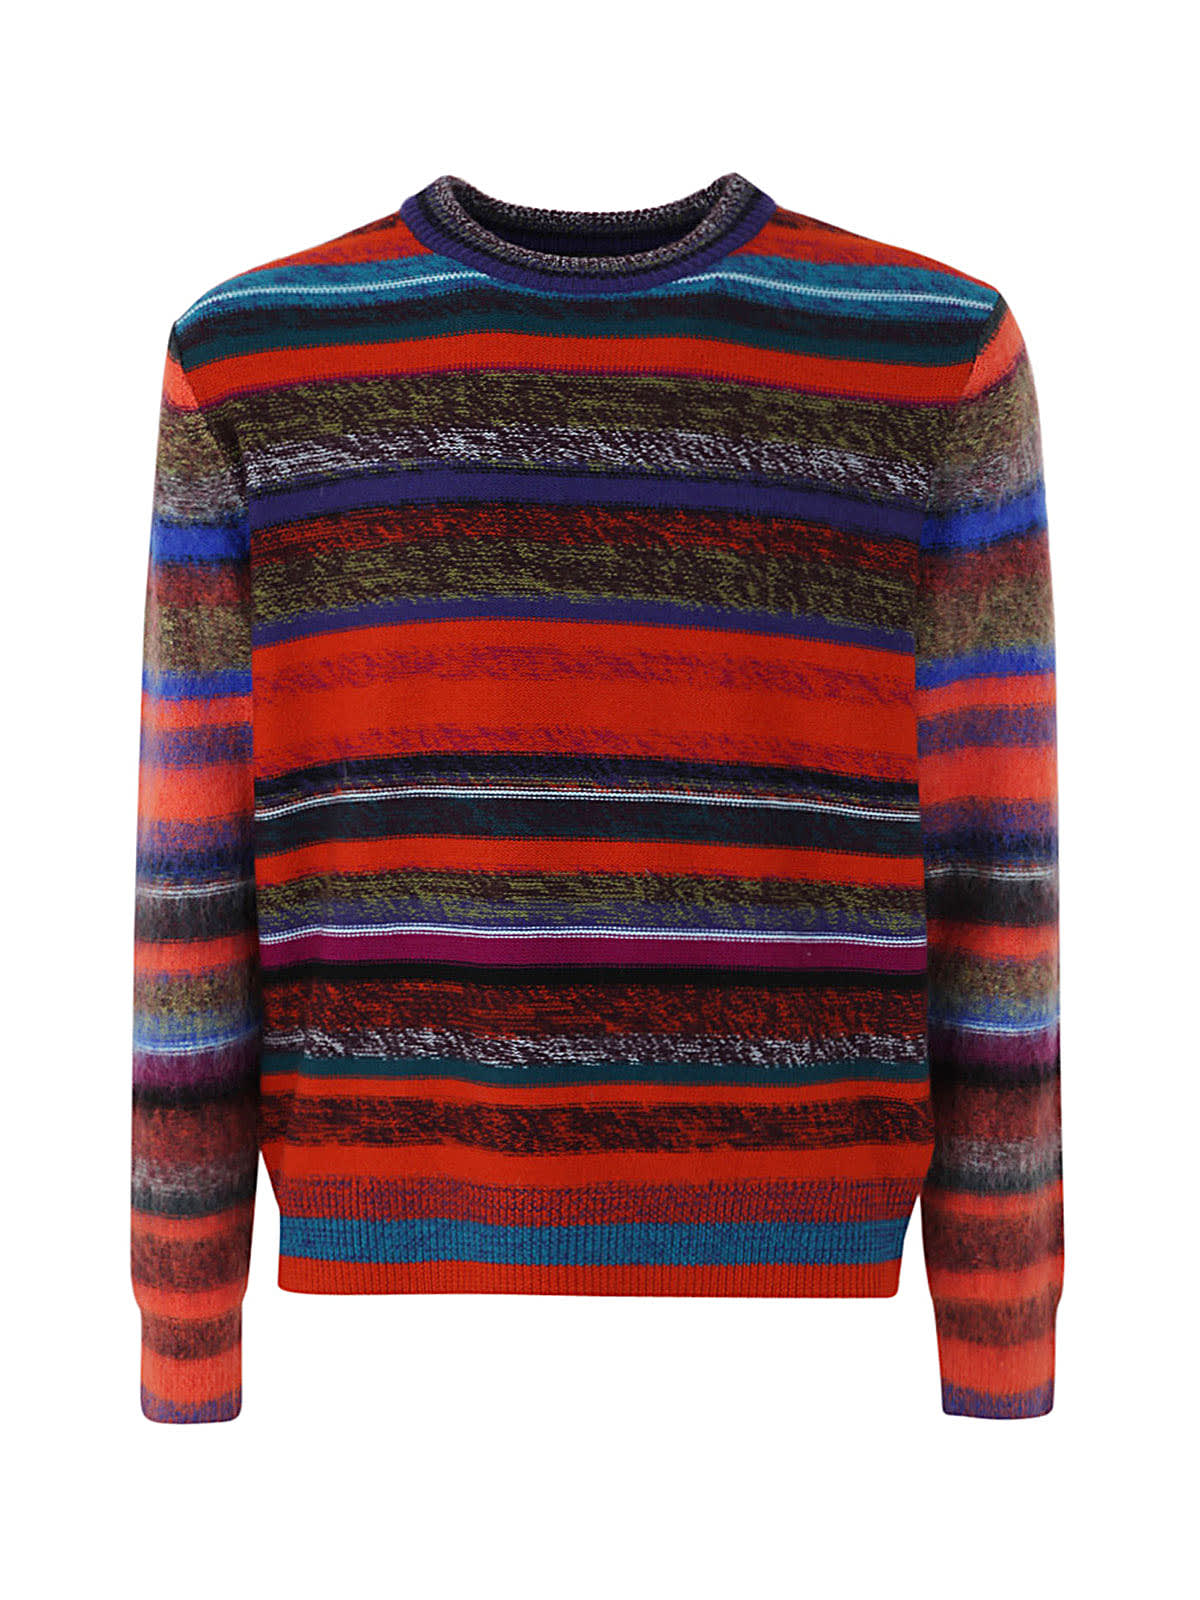 PS by Paul Smith Mens Pullover Crew Neck